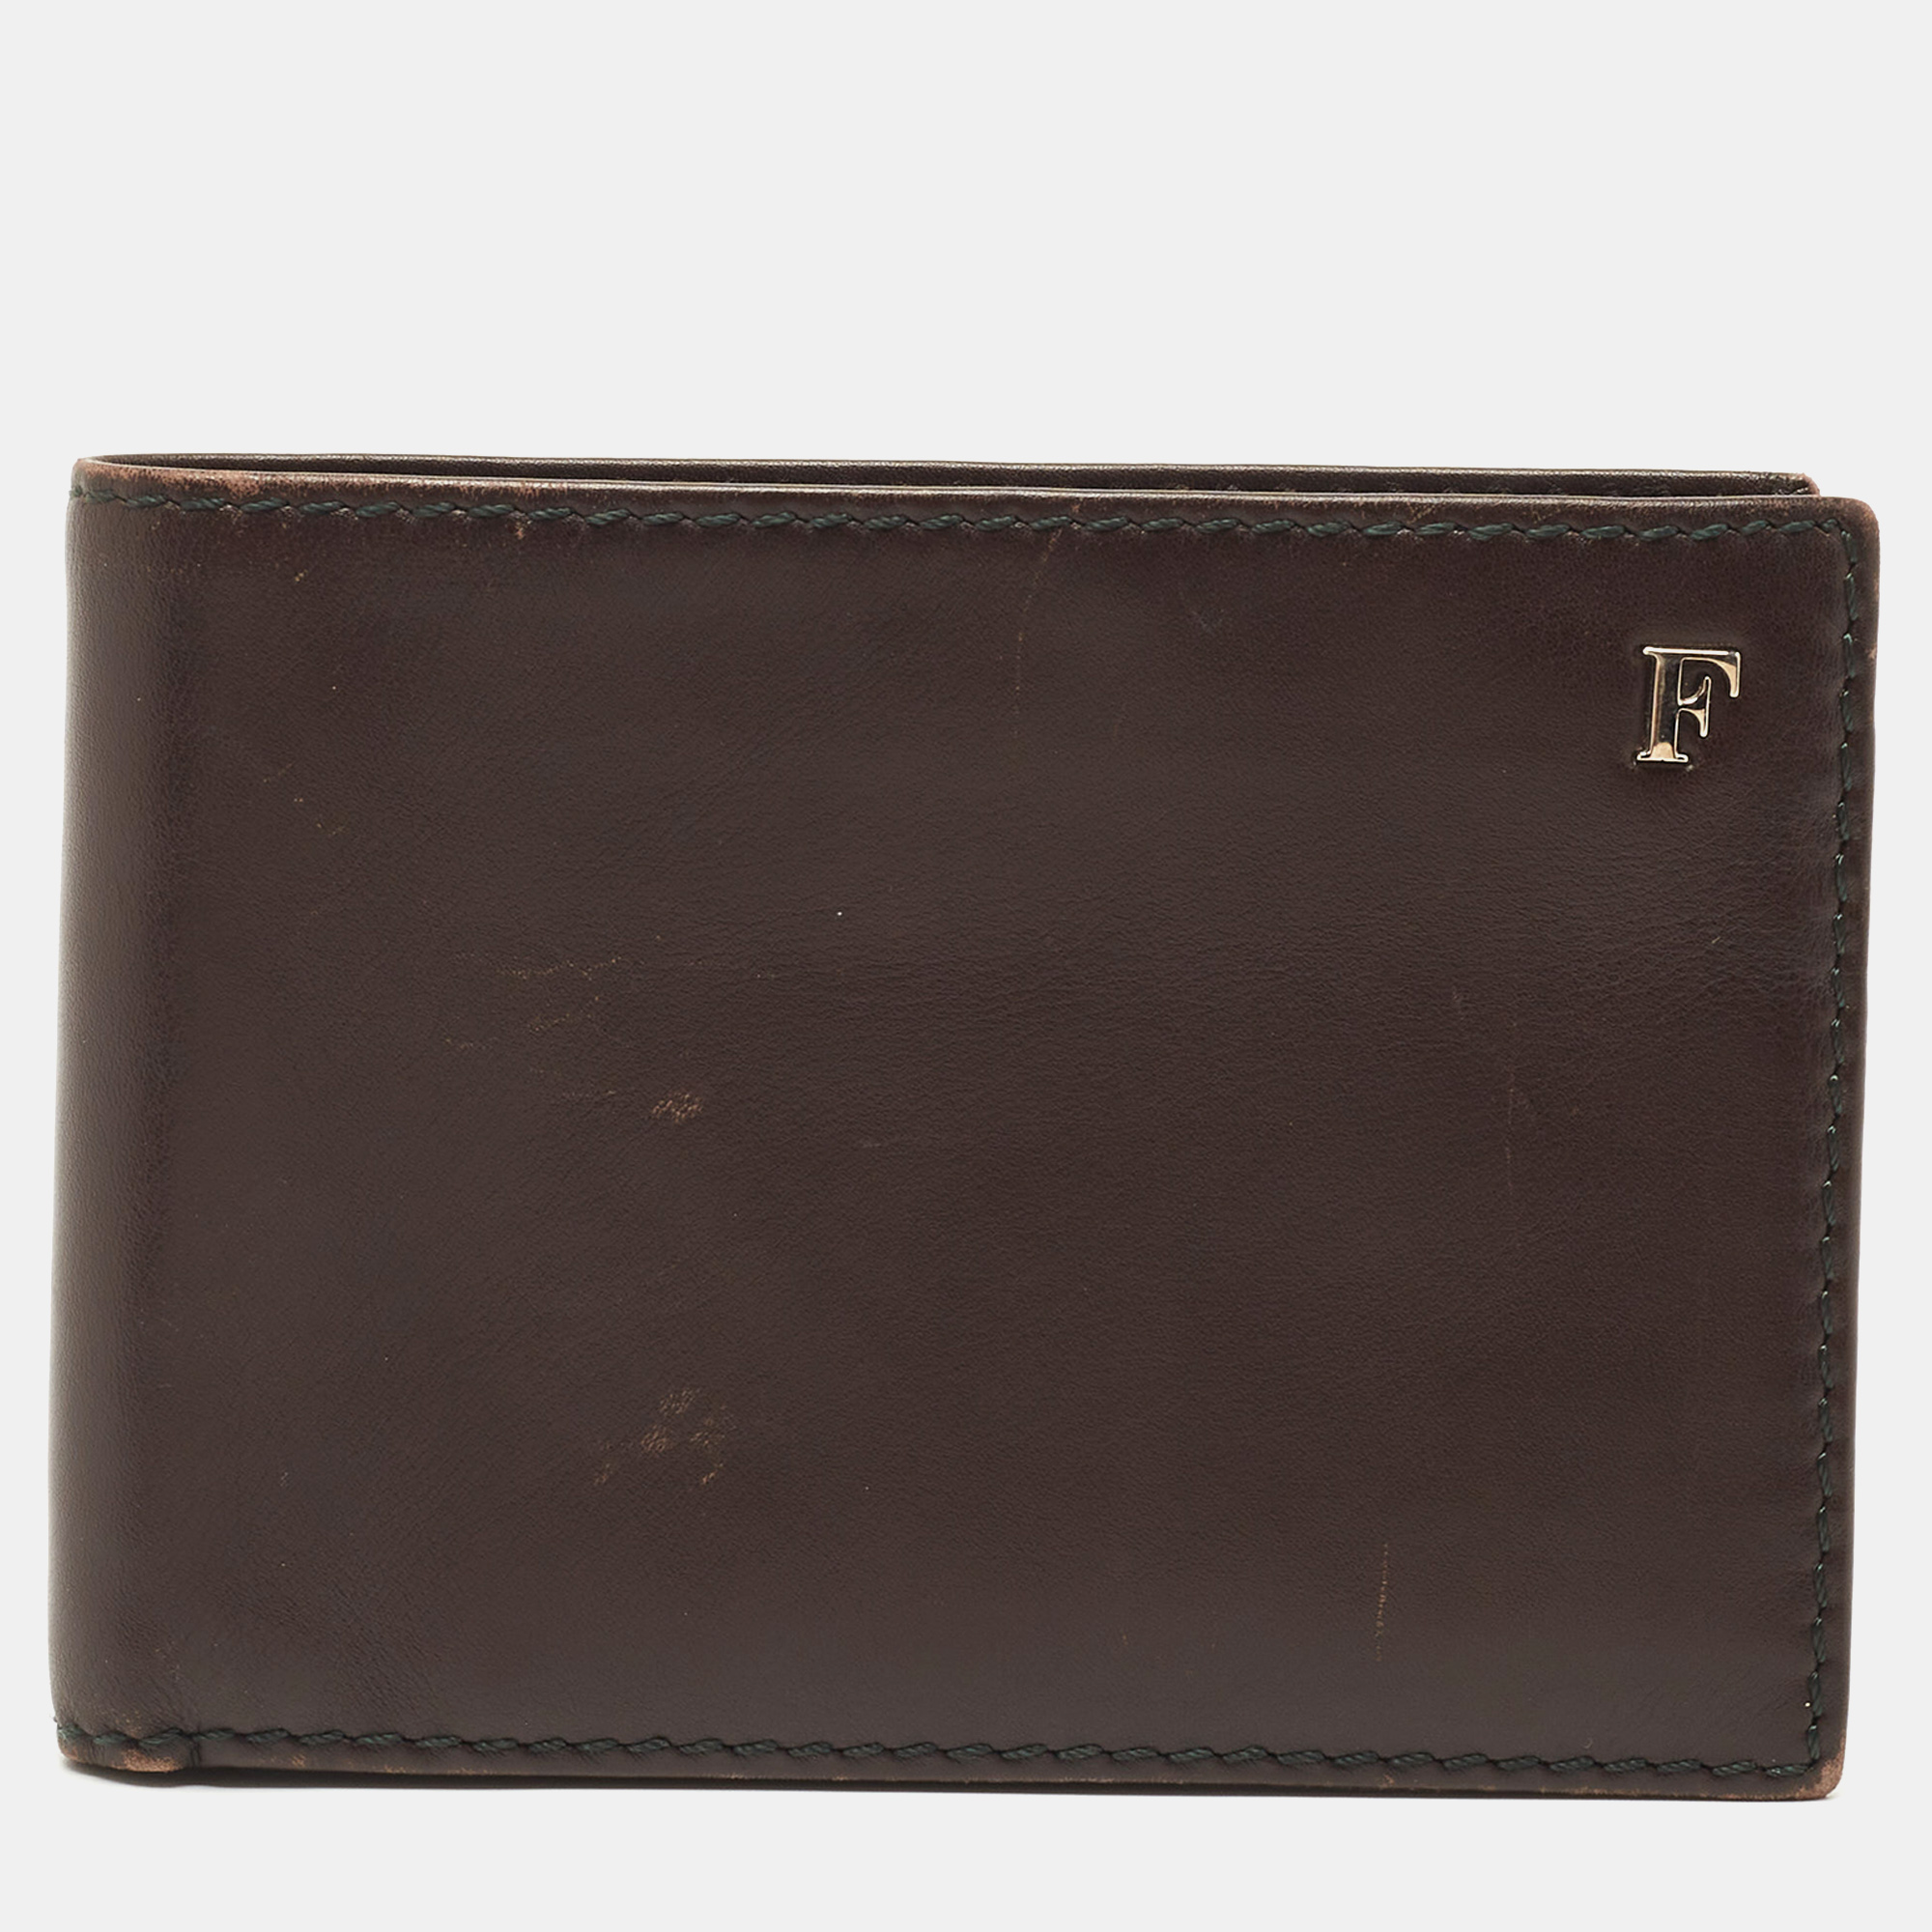 Pre-owned Gianfranco Ferre Brown Leather Bifold Wallet